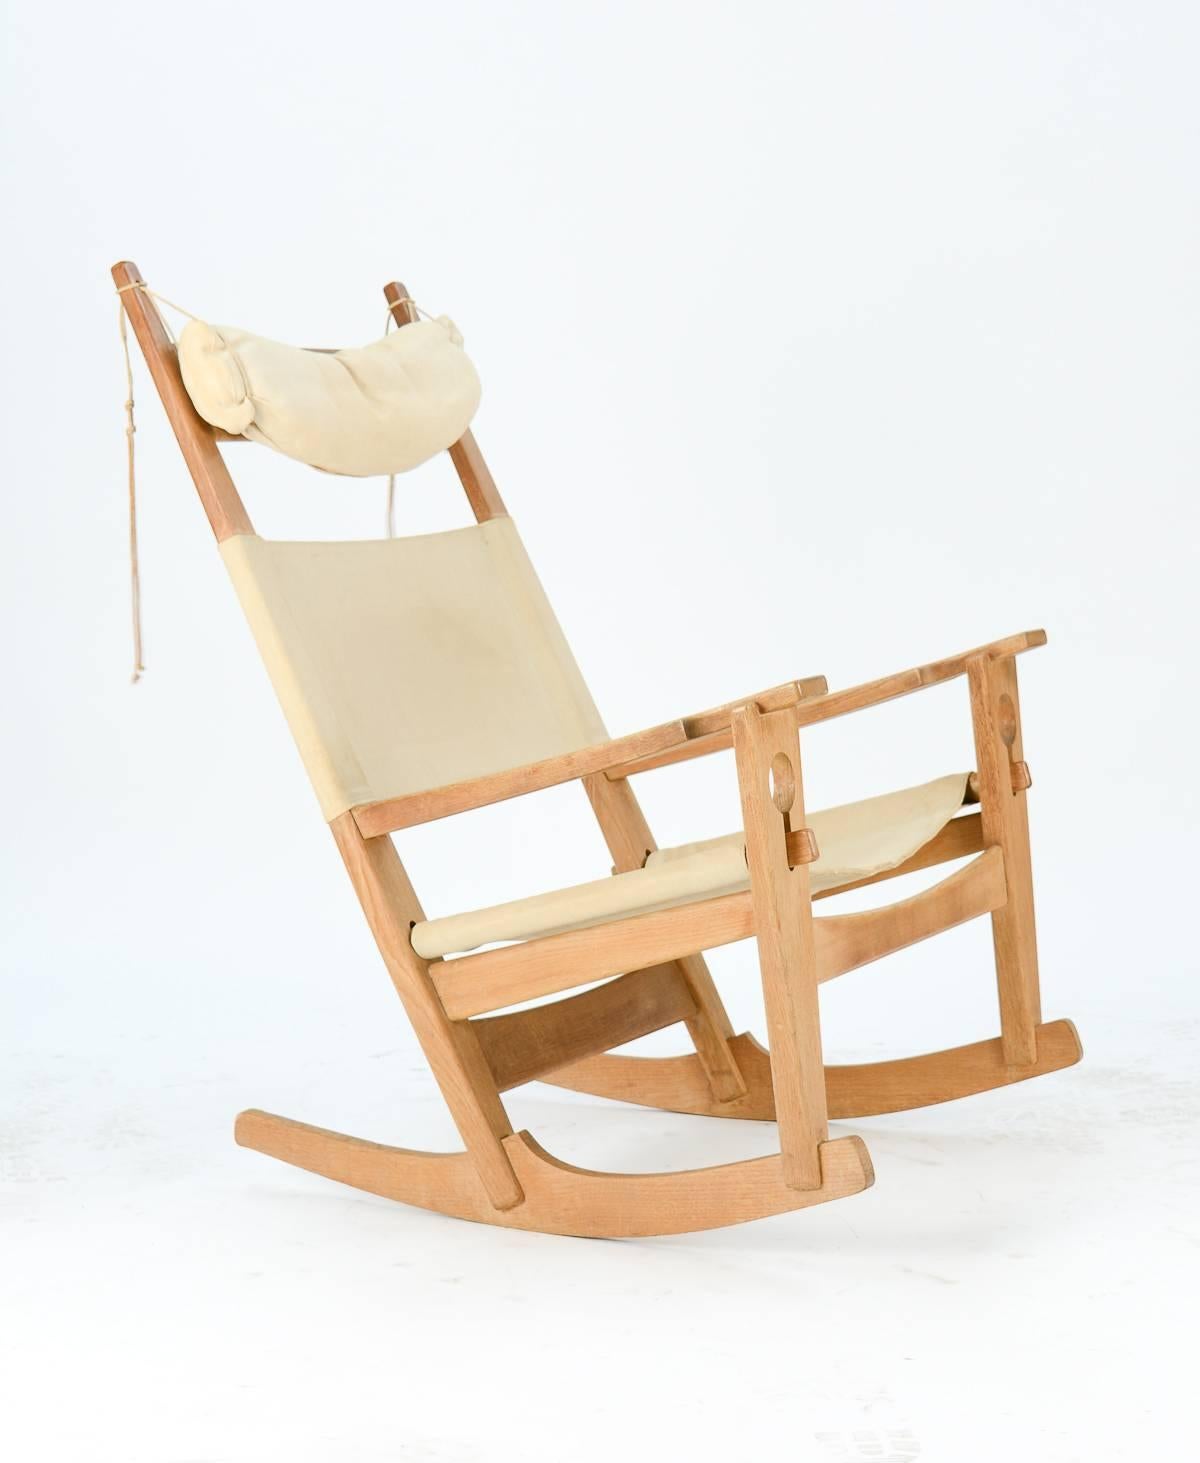 Esteemed Mid-Century Danish designer Hans Wegner's signature Key Hole rocking chair in oak with beige linen upholstery. 

Manufactured by GETAMA of Copenhagen, established 1899.

Recently imported from Denmark.

Arm height is 24 inches.